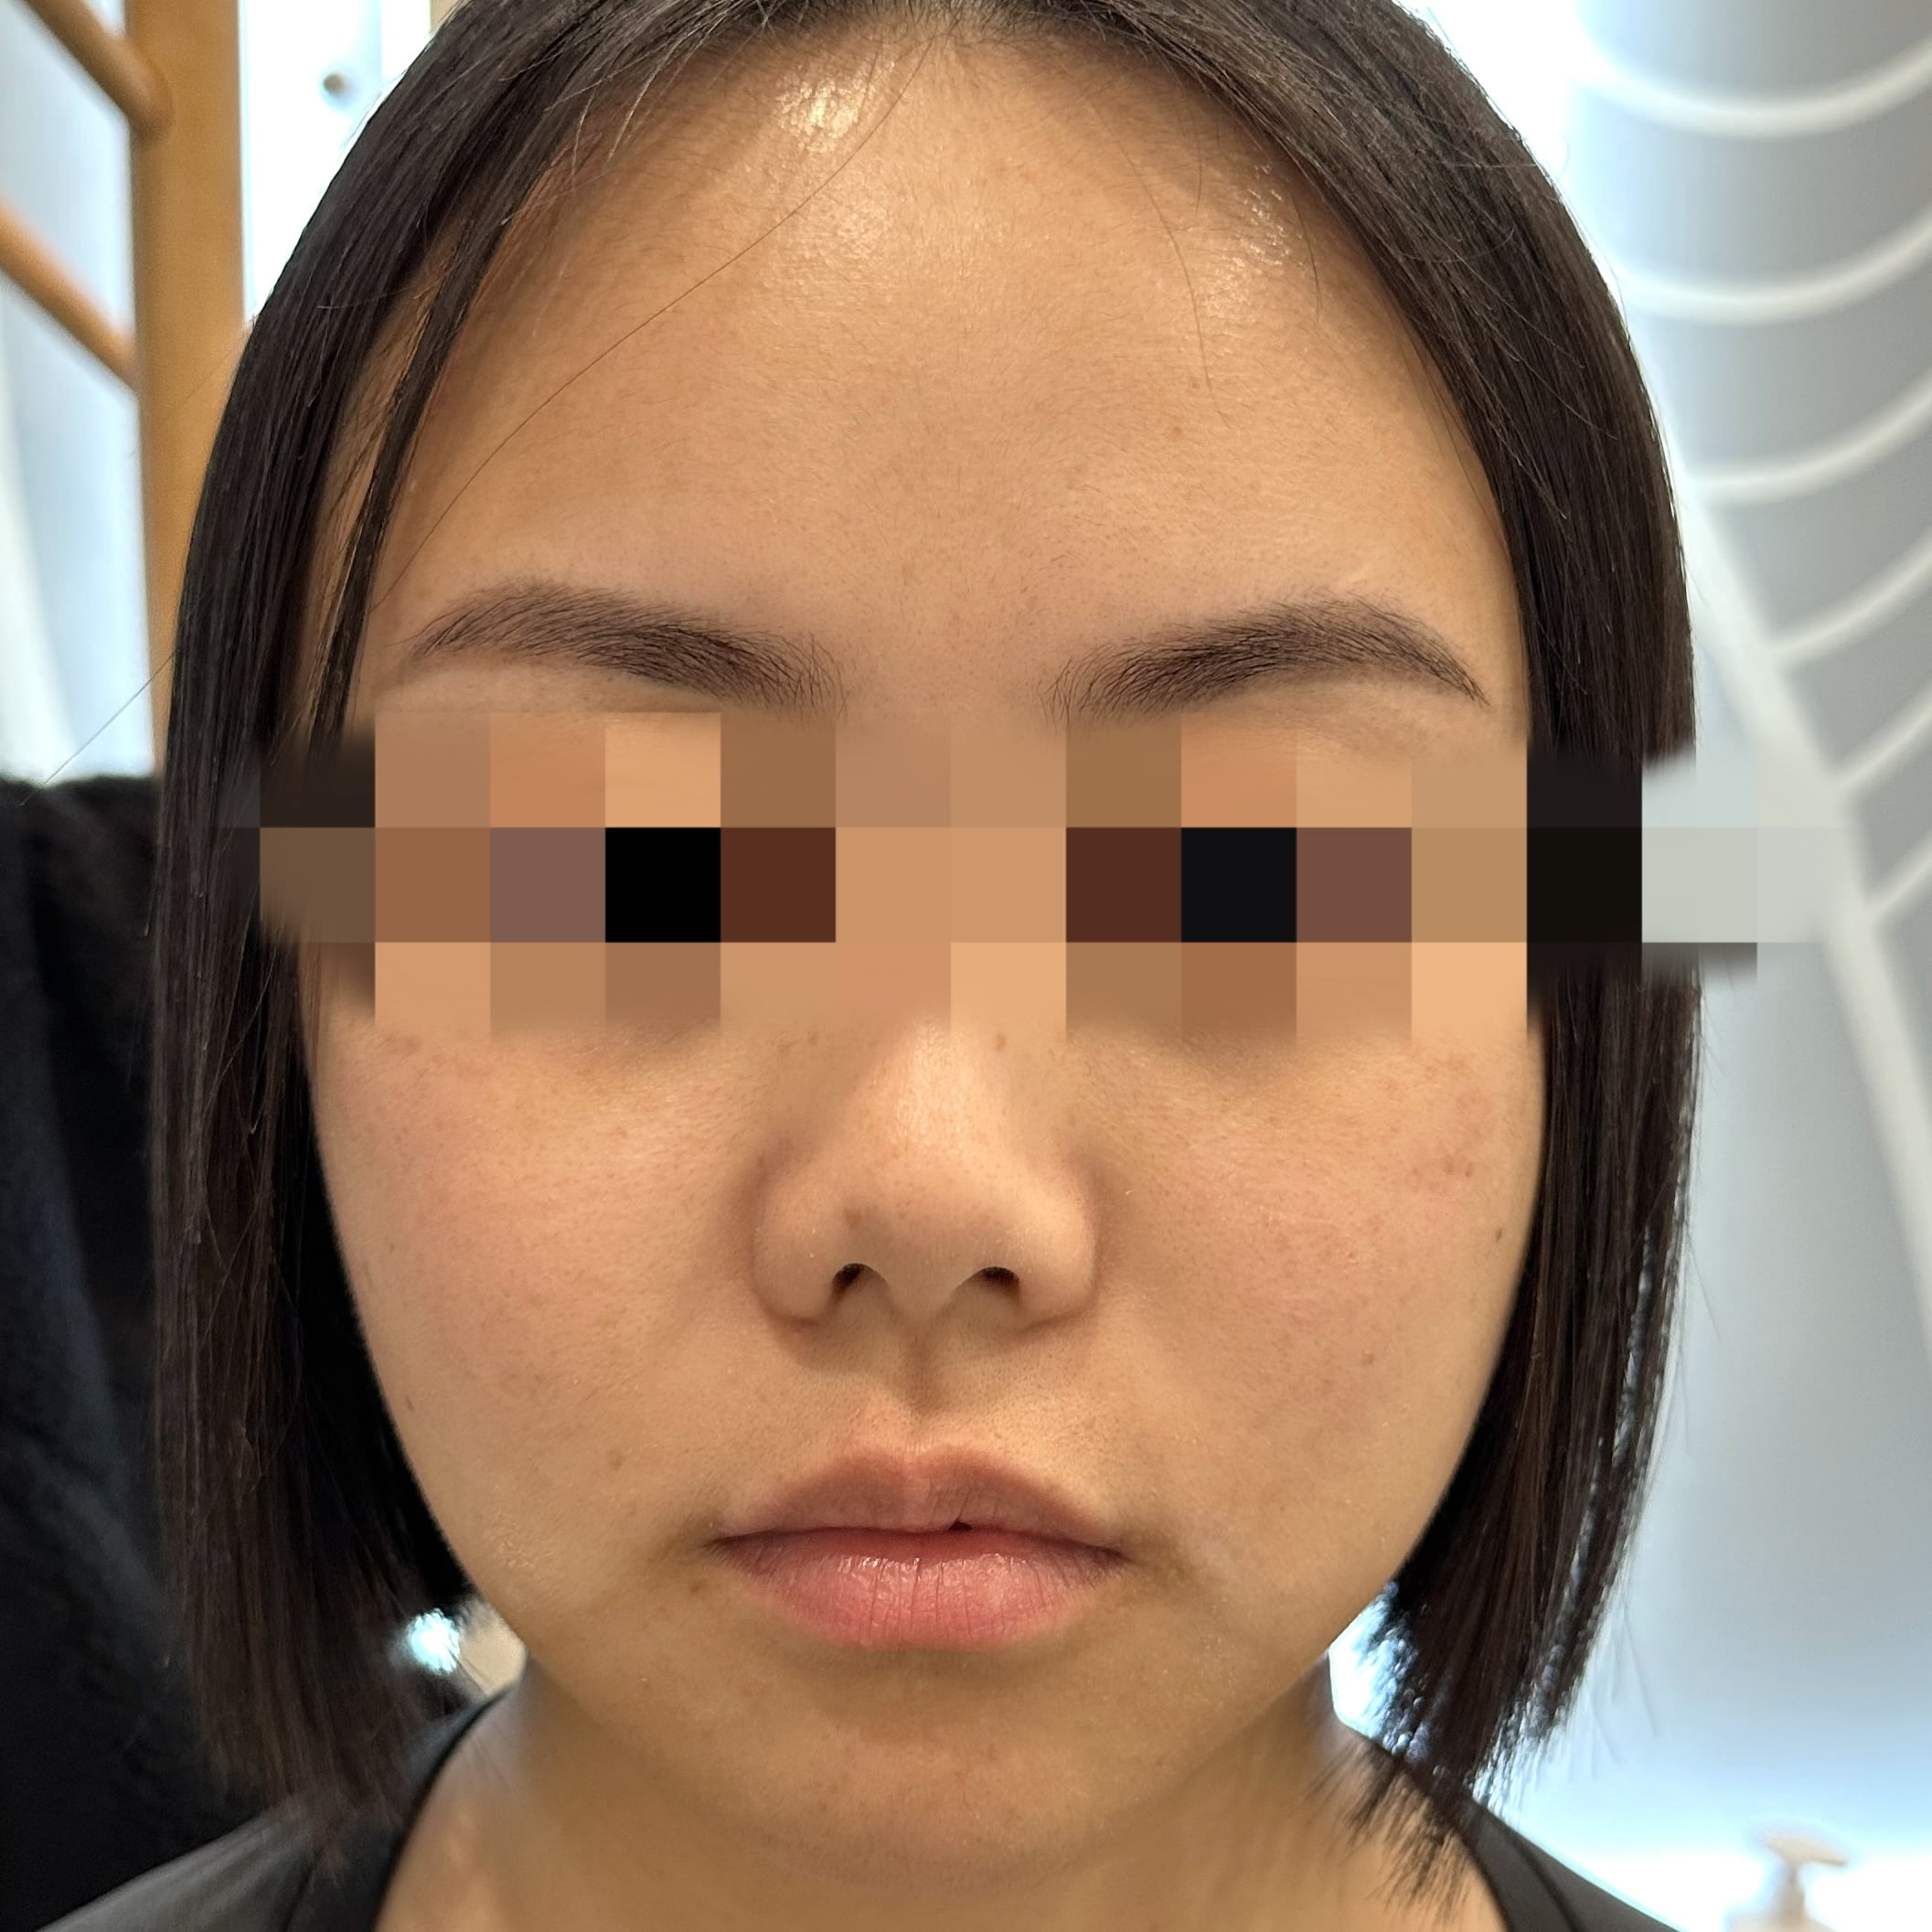 Before a Thermage FLX skin tightening treatment